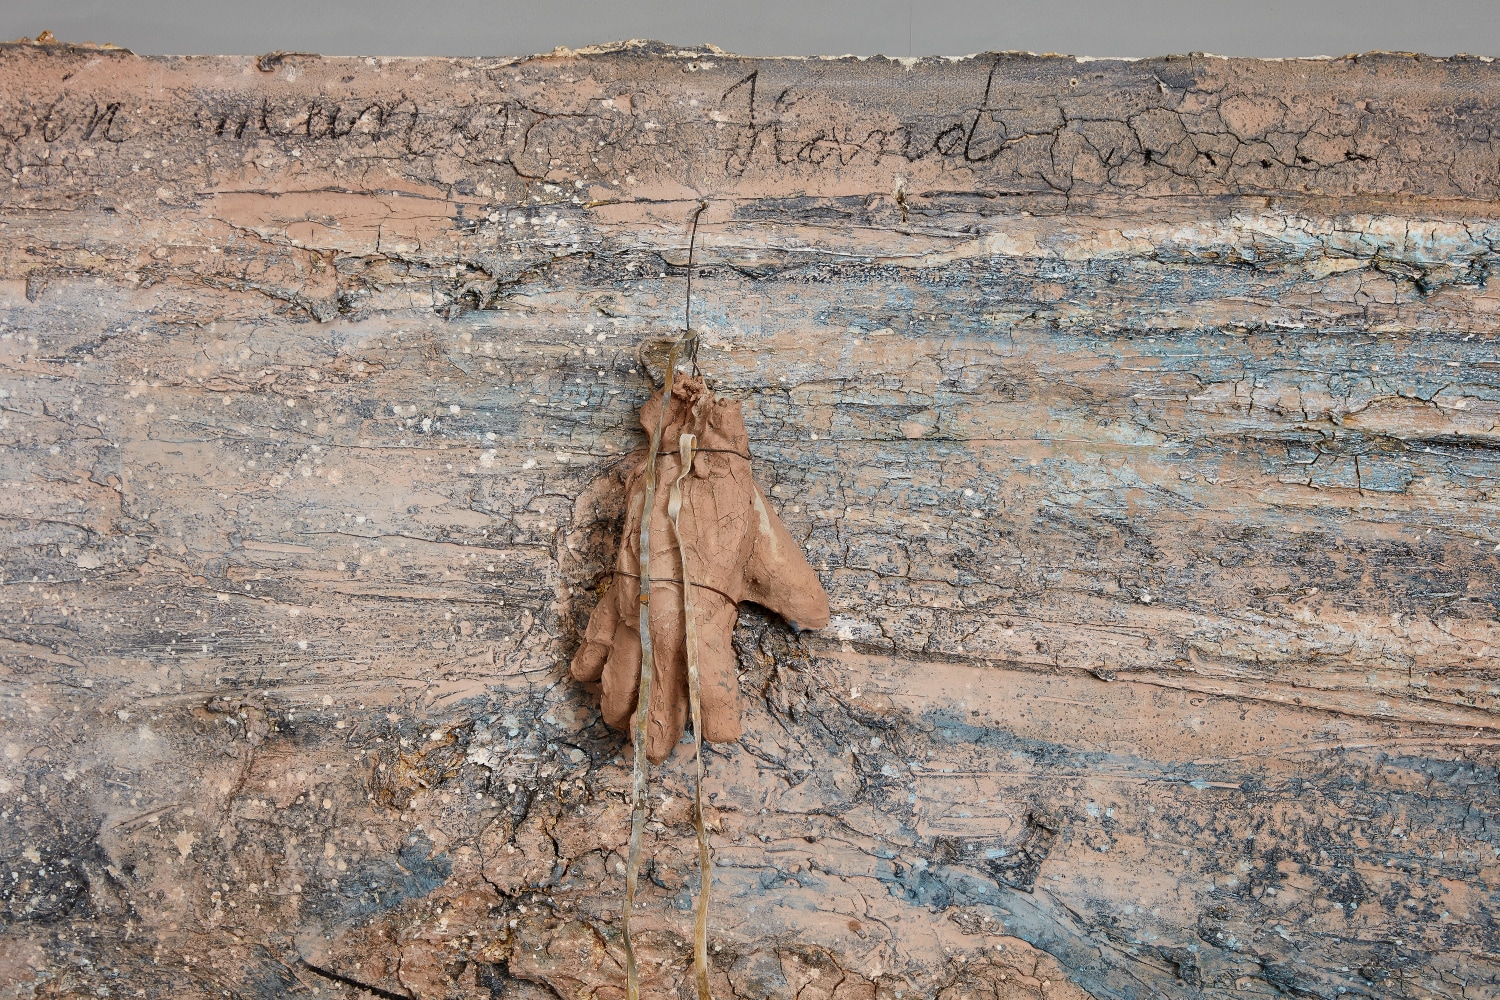 Anselm Kiefer
I am holding all of India in my Hand / Ich halte alle Indien in meiner Hand, 2003
Detail